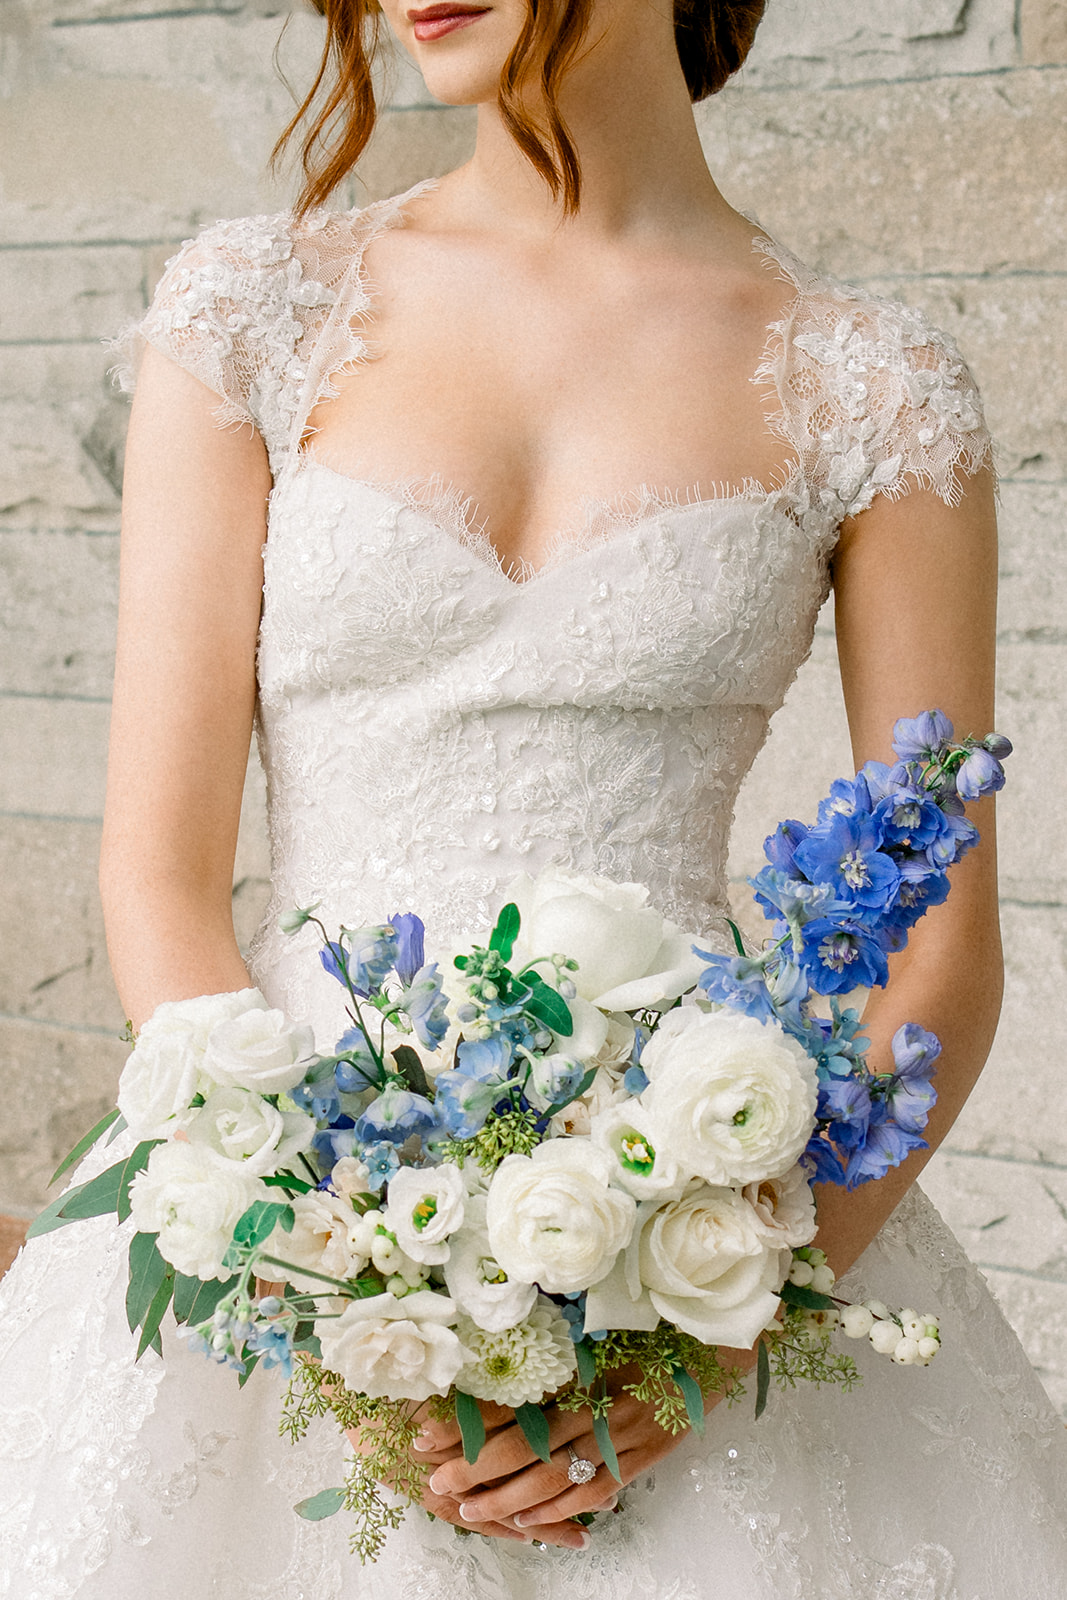 Floral arrangement in blue and ivory hues by Frog Prince Weddings, adorning a destination wedding aisle in Ireland's Cas